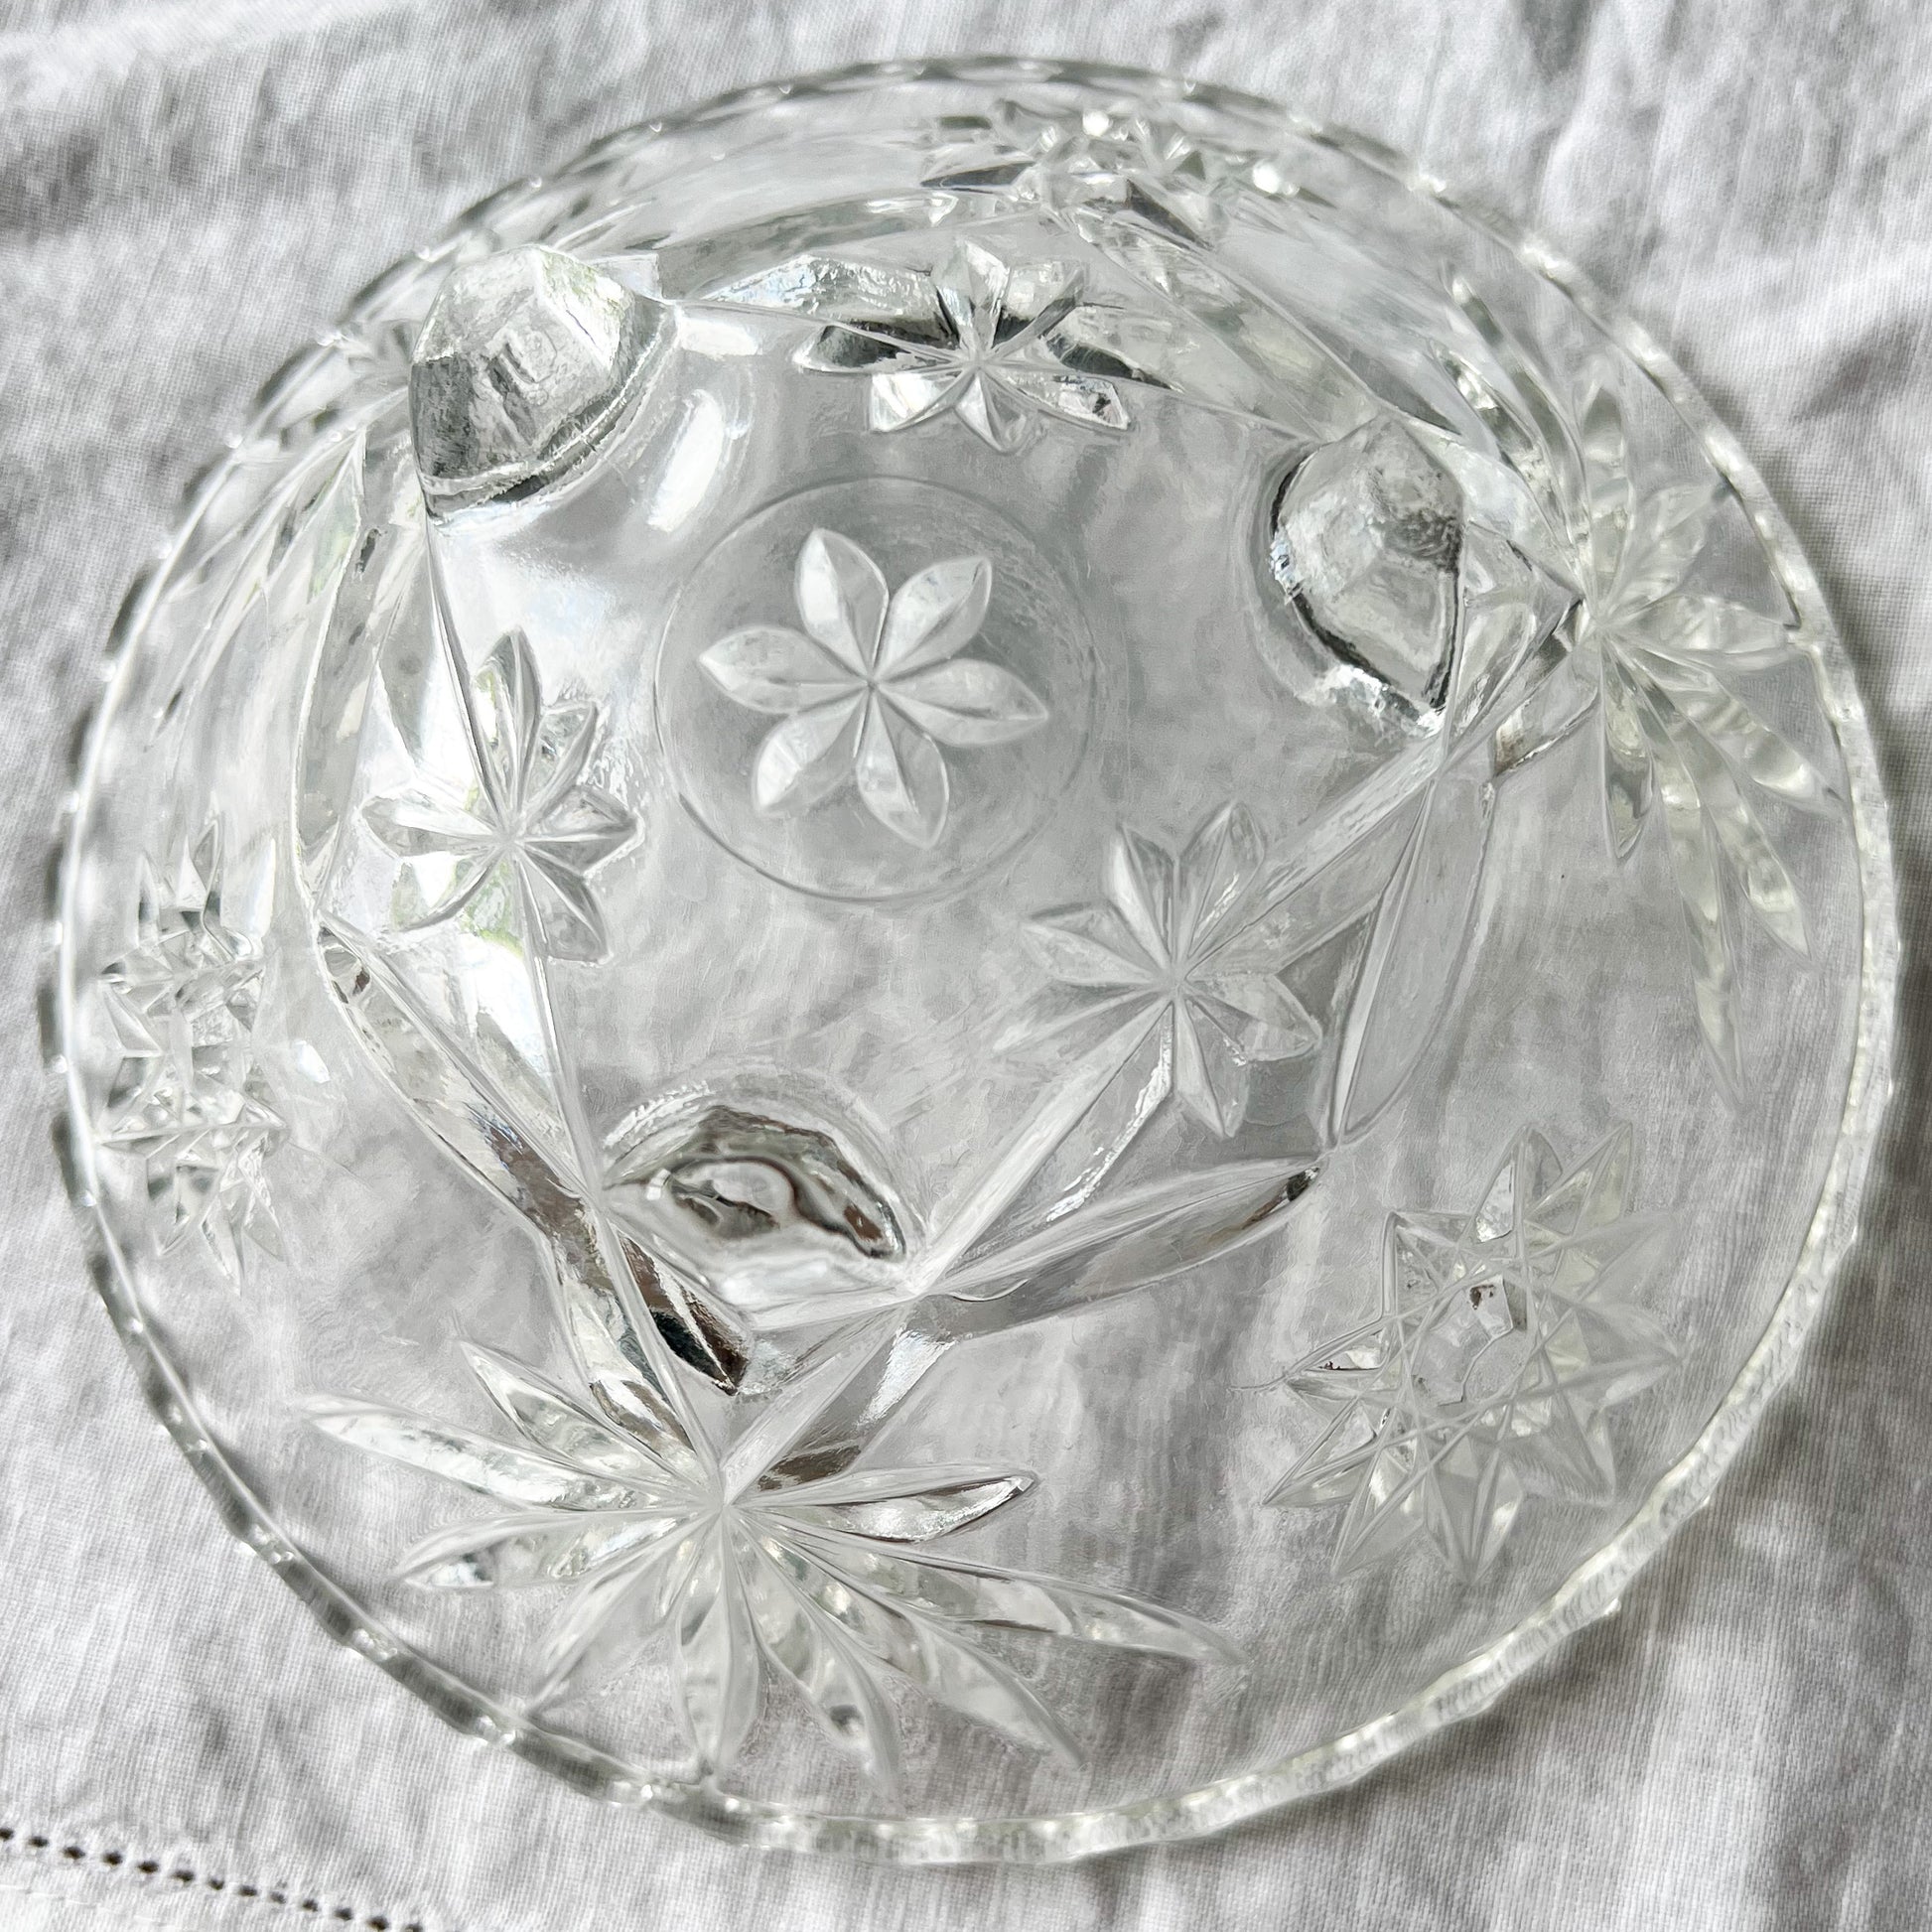 Vintage Starry Night Jewelry Bowl - BelleStyle